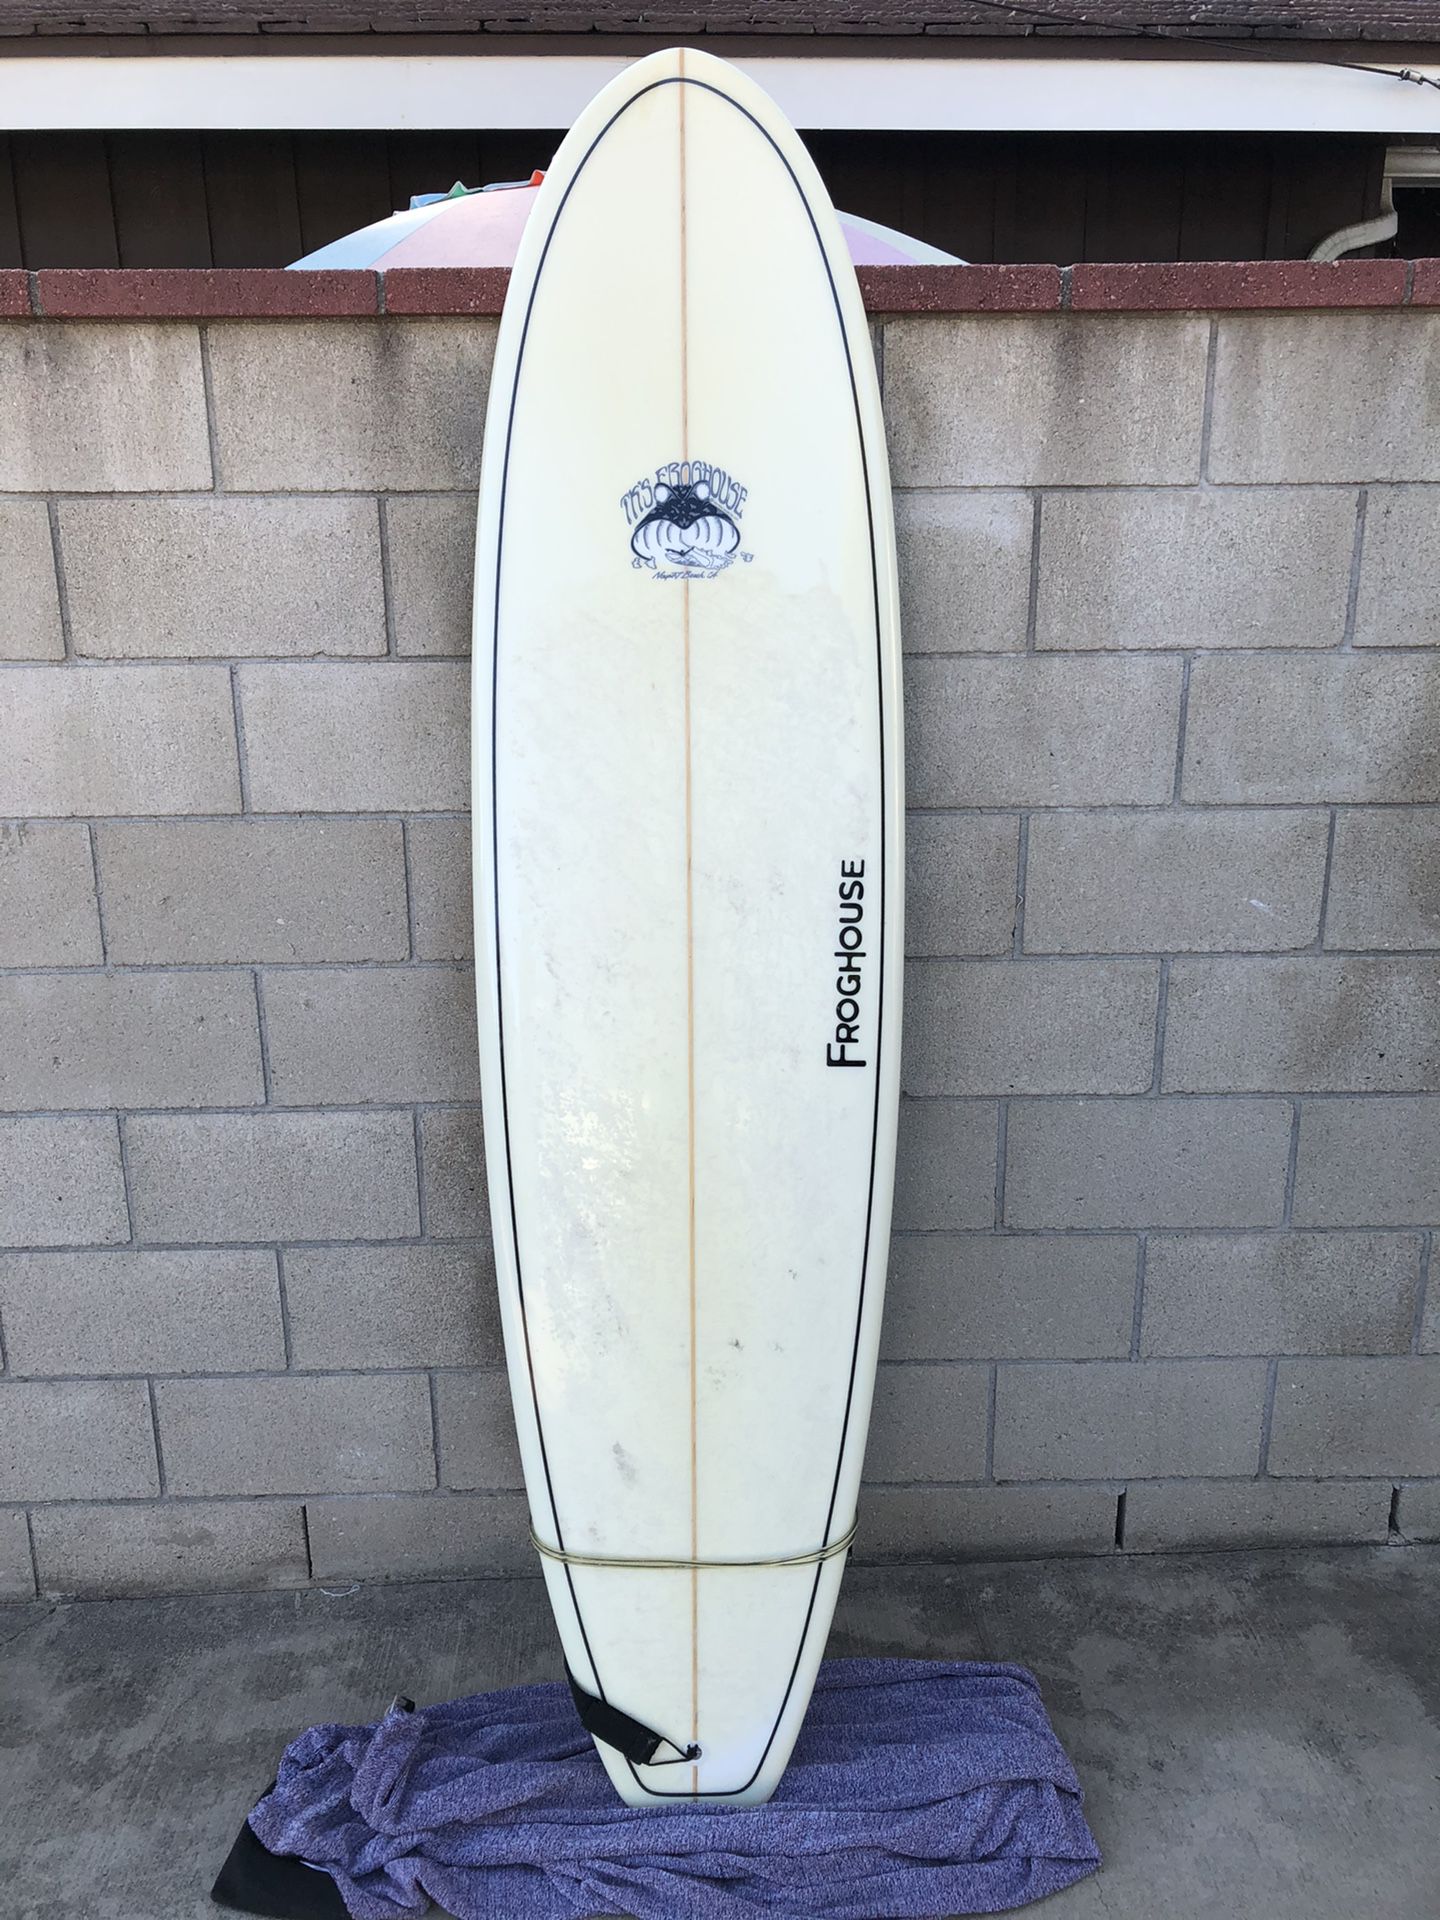 Froghouse Surfboard